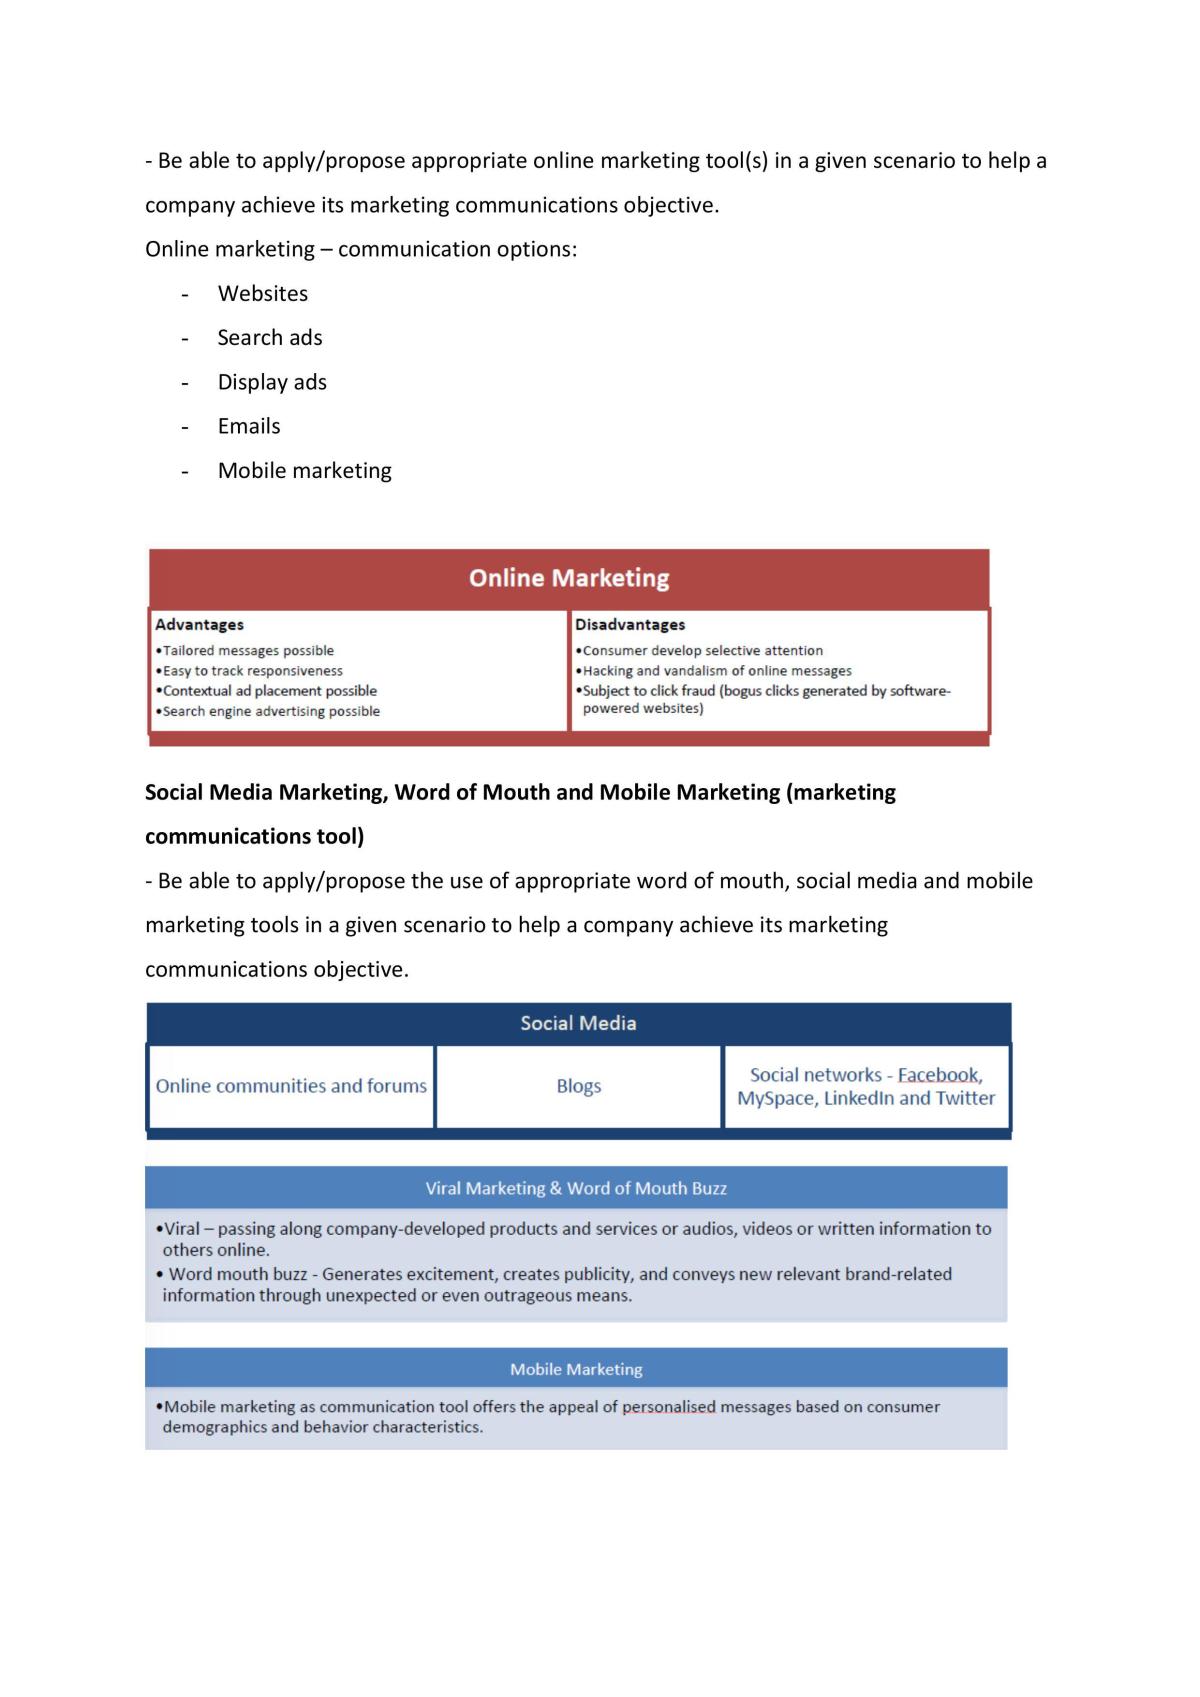 MKT202 Marketing Management Exam Notes - Page 17